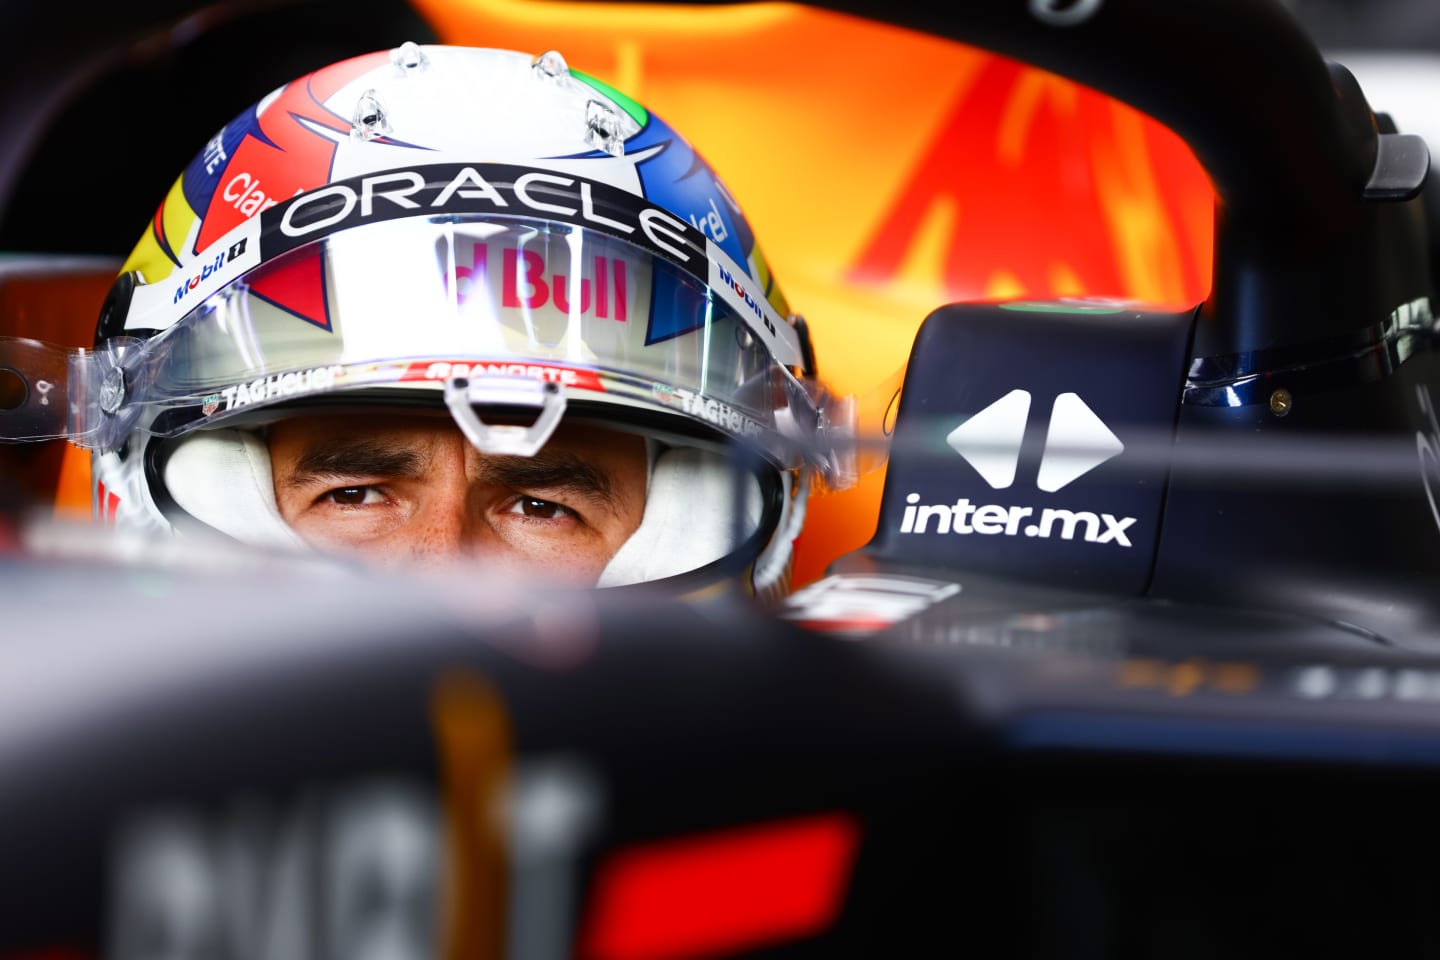 IMOLA, ITALY - APRIL 23: Sergio Perez of Mexico and Oracle Red Bull Racing prepares to drive during Sprint ahead of the F1 Grand Prix of Emilia Romagna at Autodromo Enzo e Dino Ferrari on April 23, 2022 in Imola, Italy. (Photo by Mark Thompson/Getty Images)